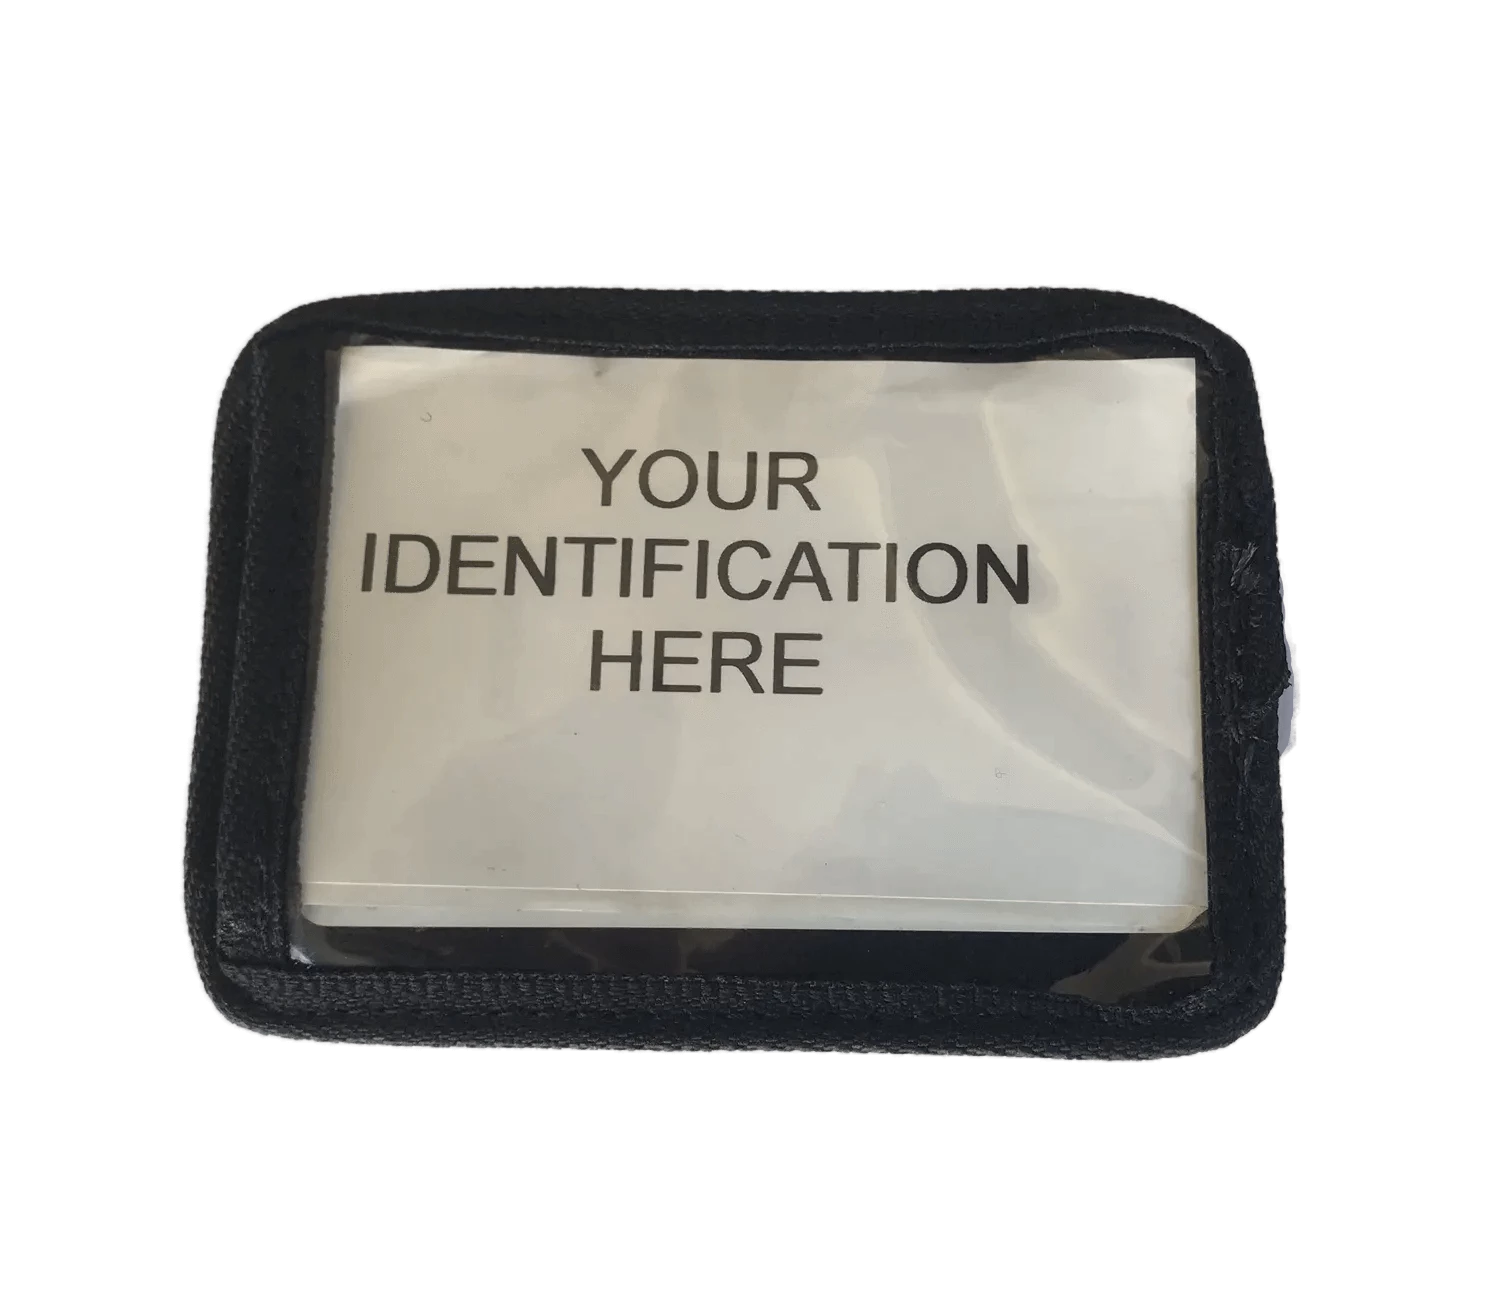 ID Holder for Everyday Carry JustGoodKit ID Holder for Everyday Carry ID Holder for Everyday Carry